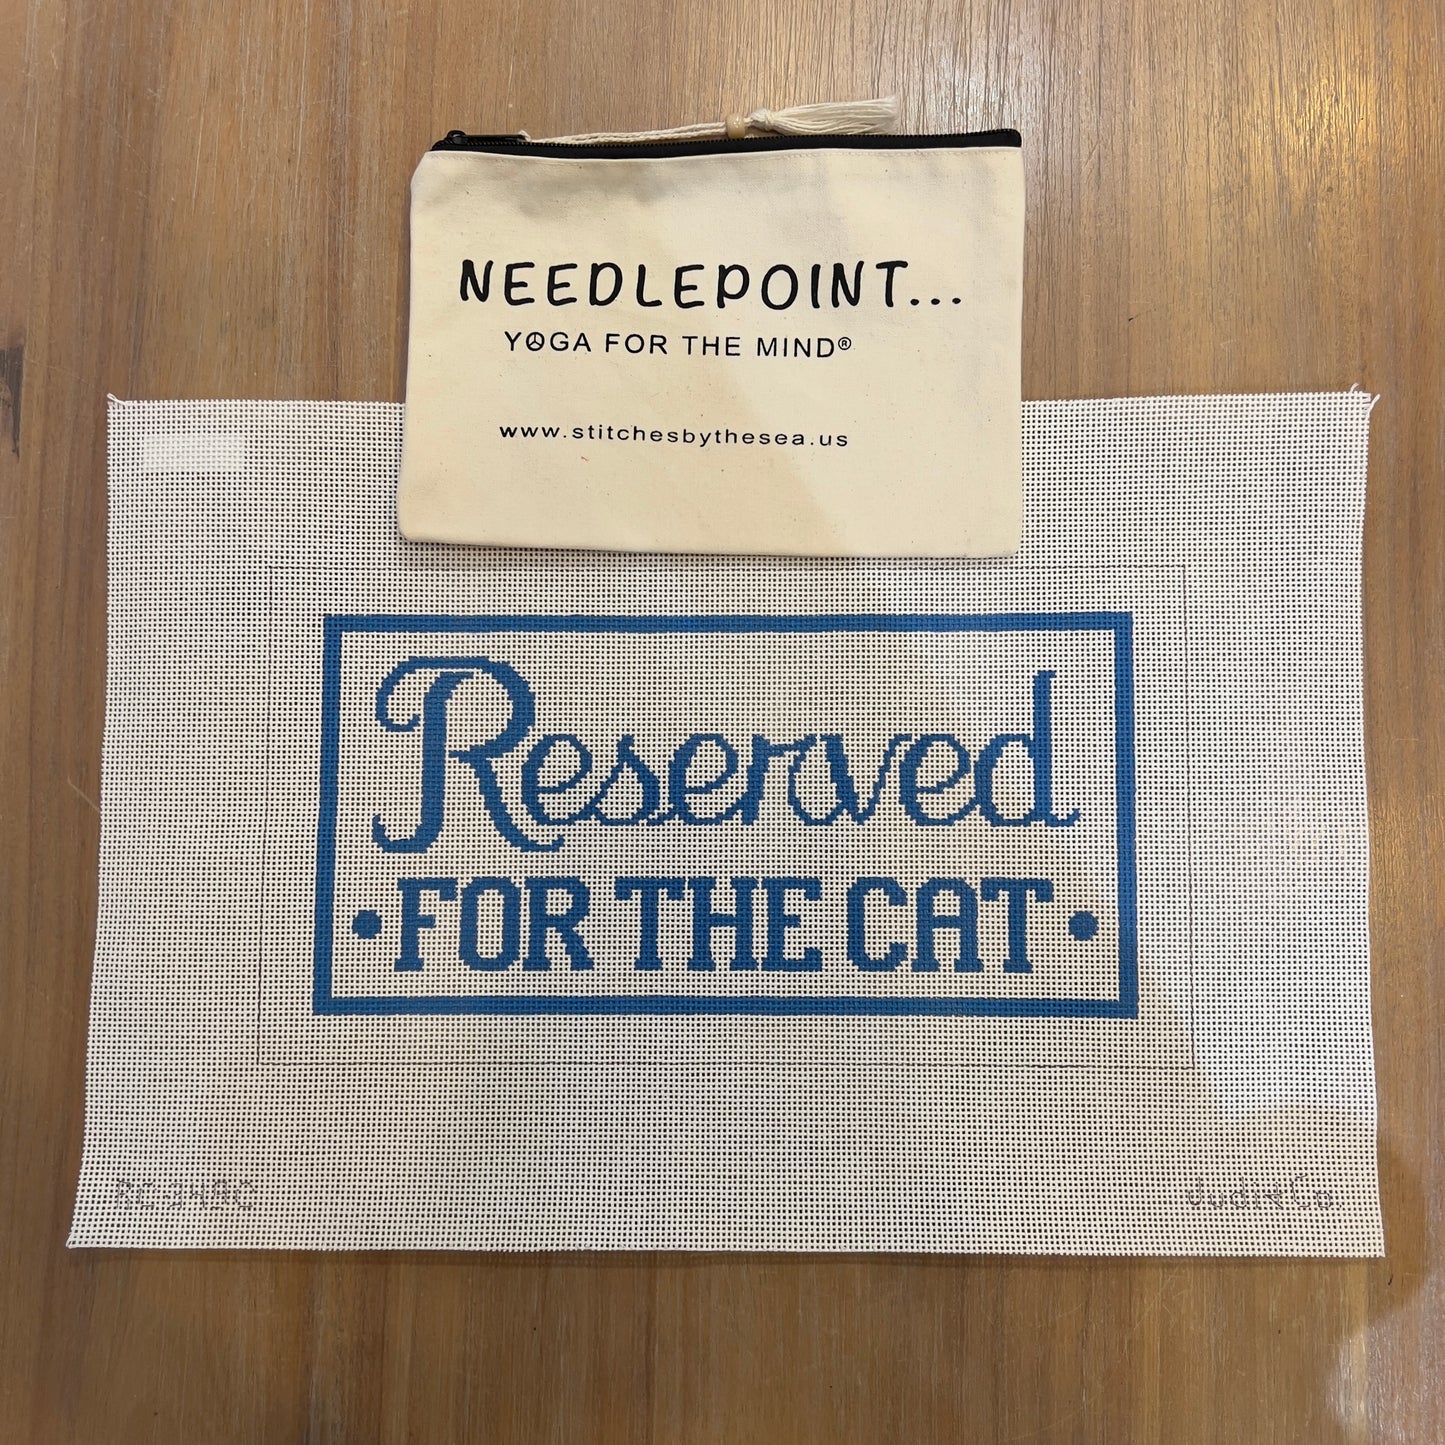 Reserved For The Cat